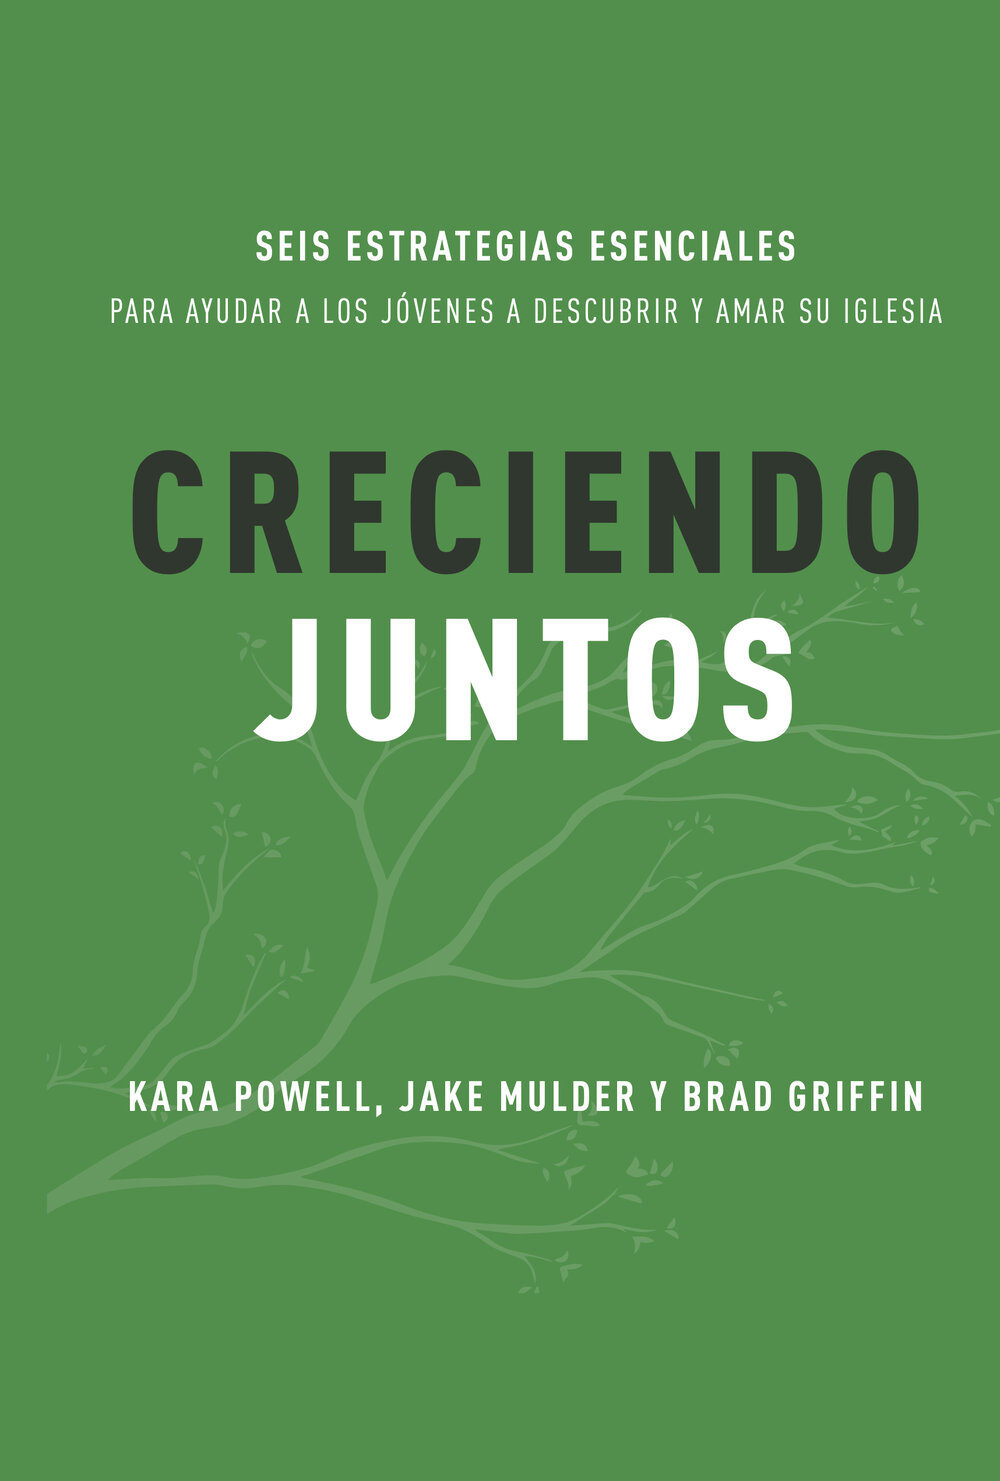 Growing Young Spanish FRONT Cover copy.jpg